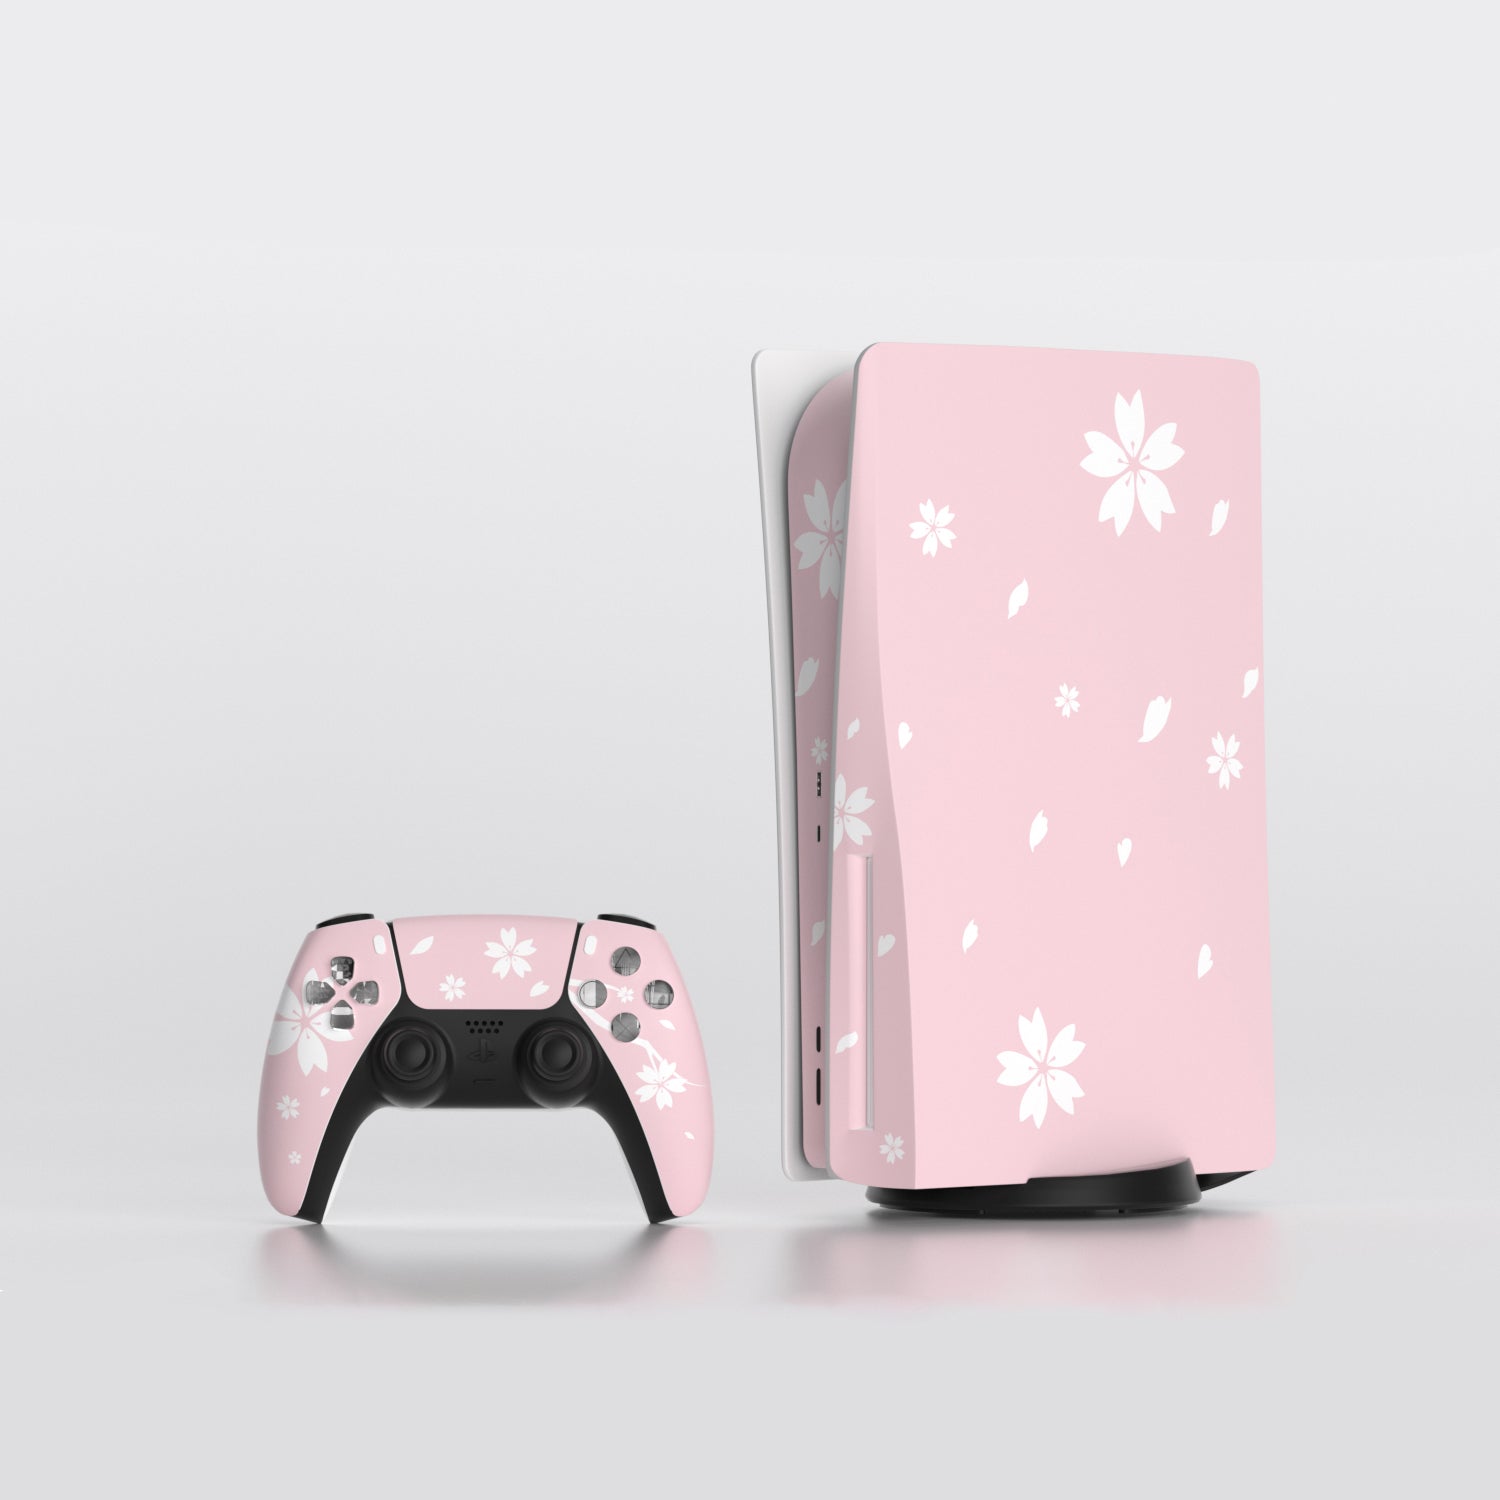  Ps5 Stickers Full Body Vinyl Skin Decal Cover for